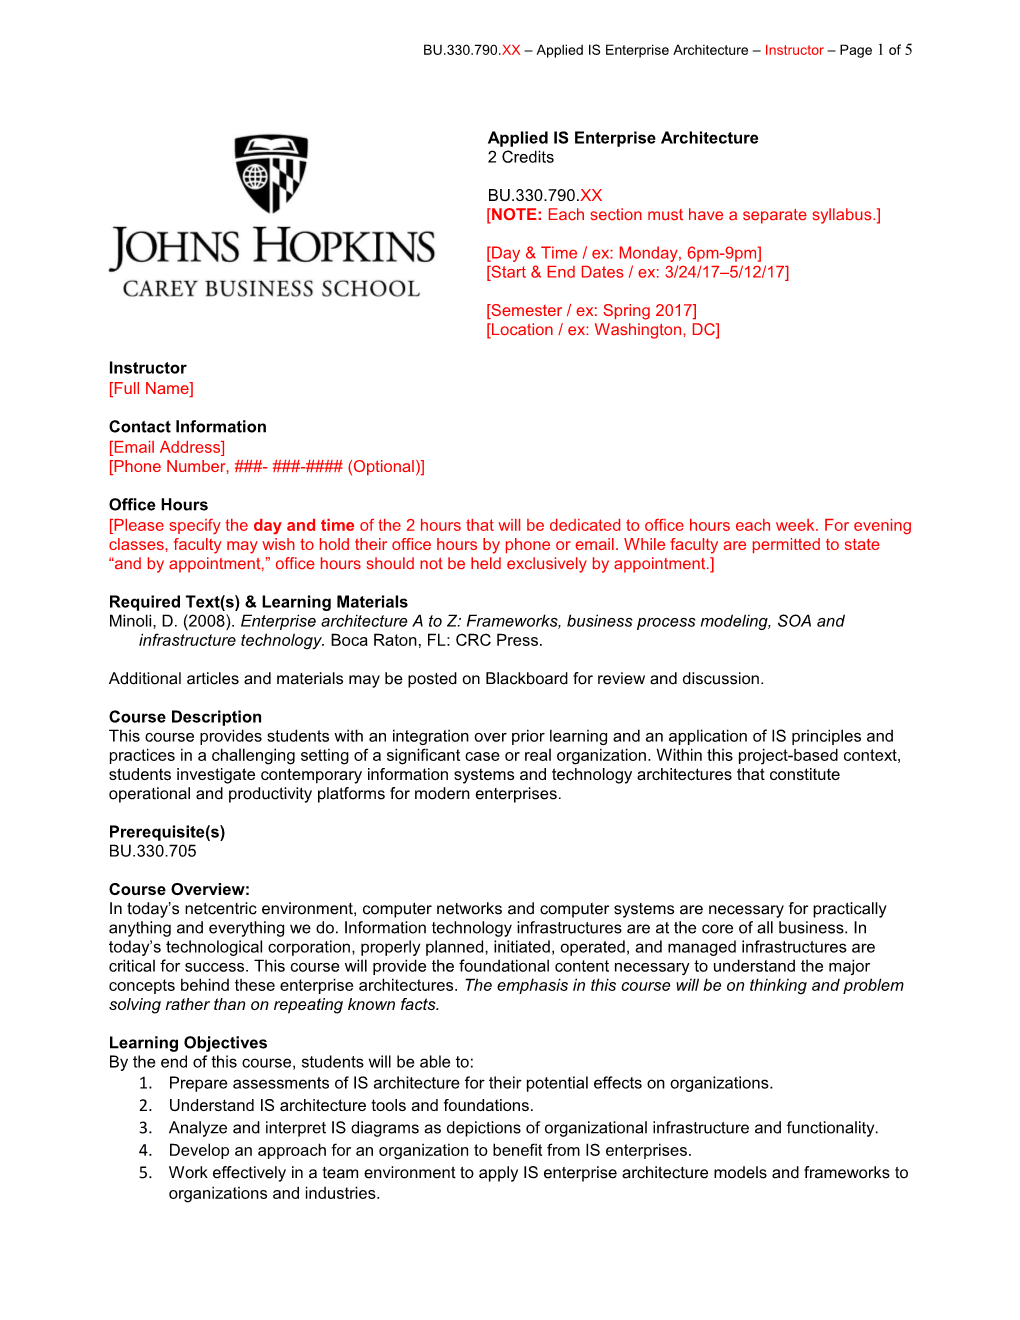 BU.330.790.XX Applied IS Enterprise Architecture Instructor Page 1 of 5